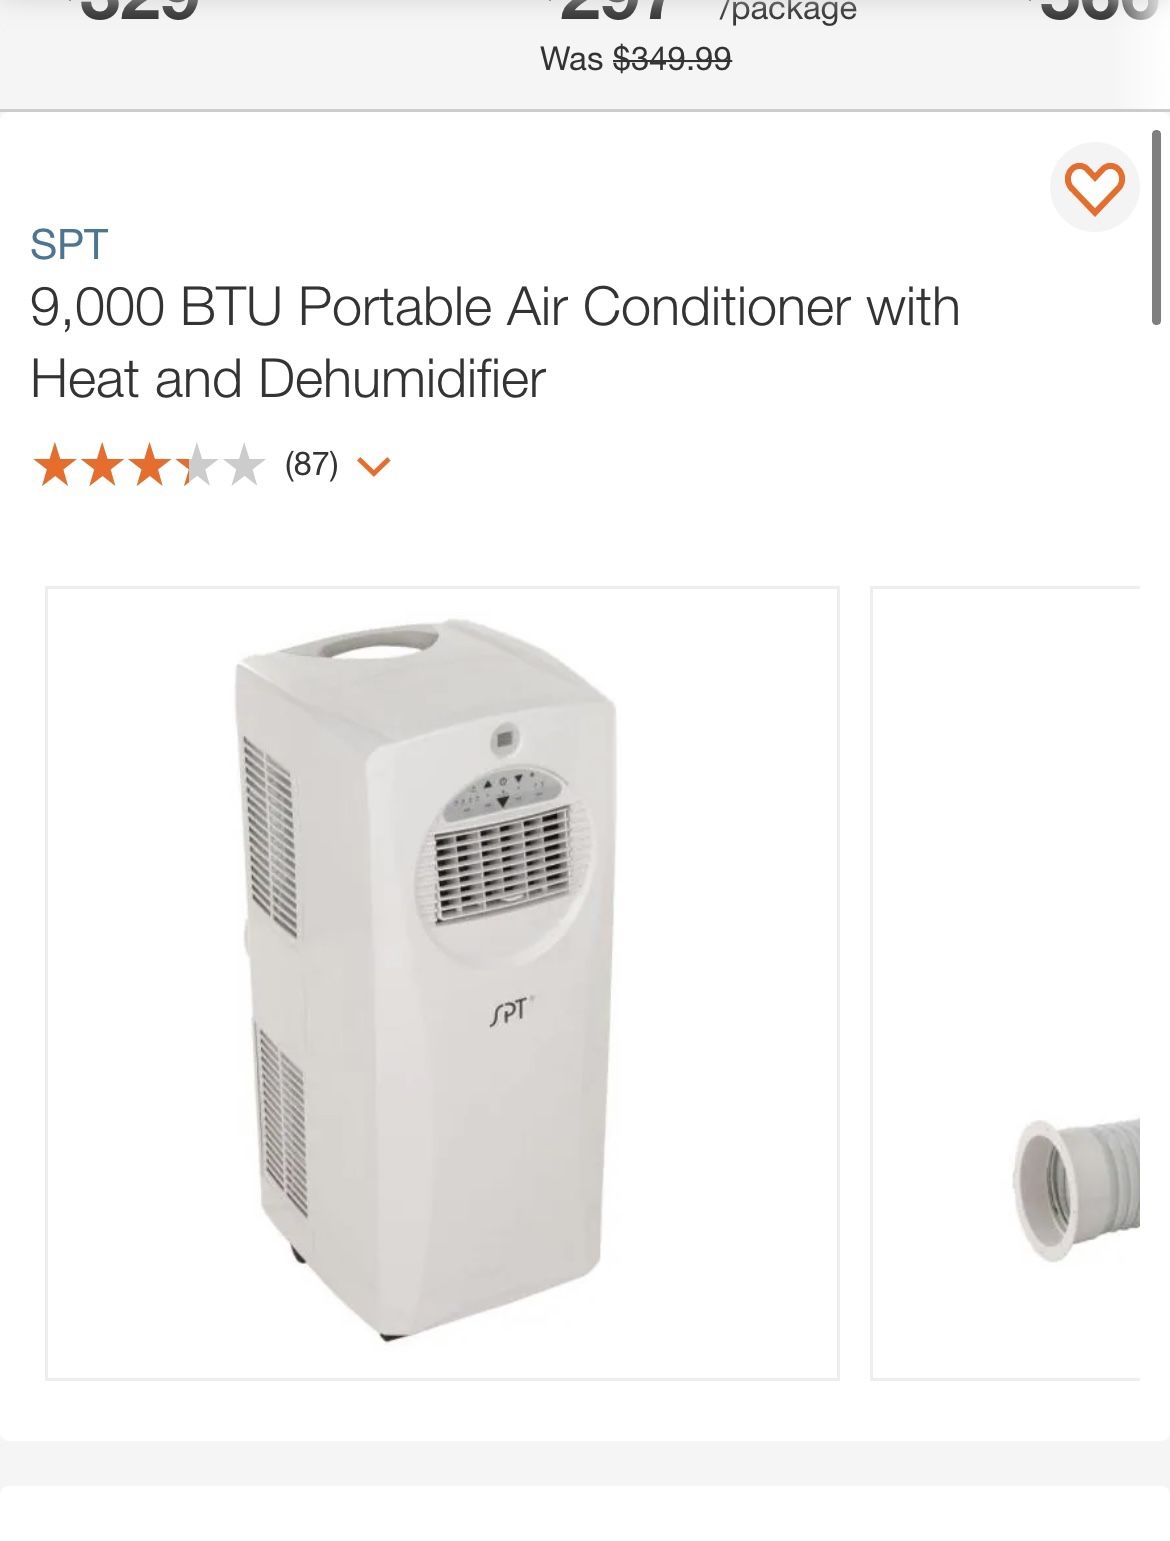 Portable Air Conditioner with Heat and Dehumidifier